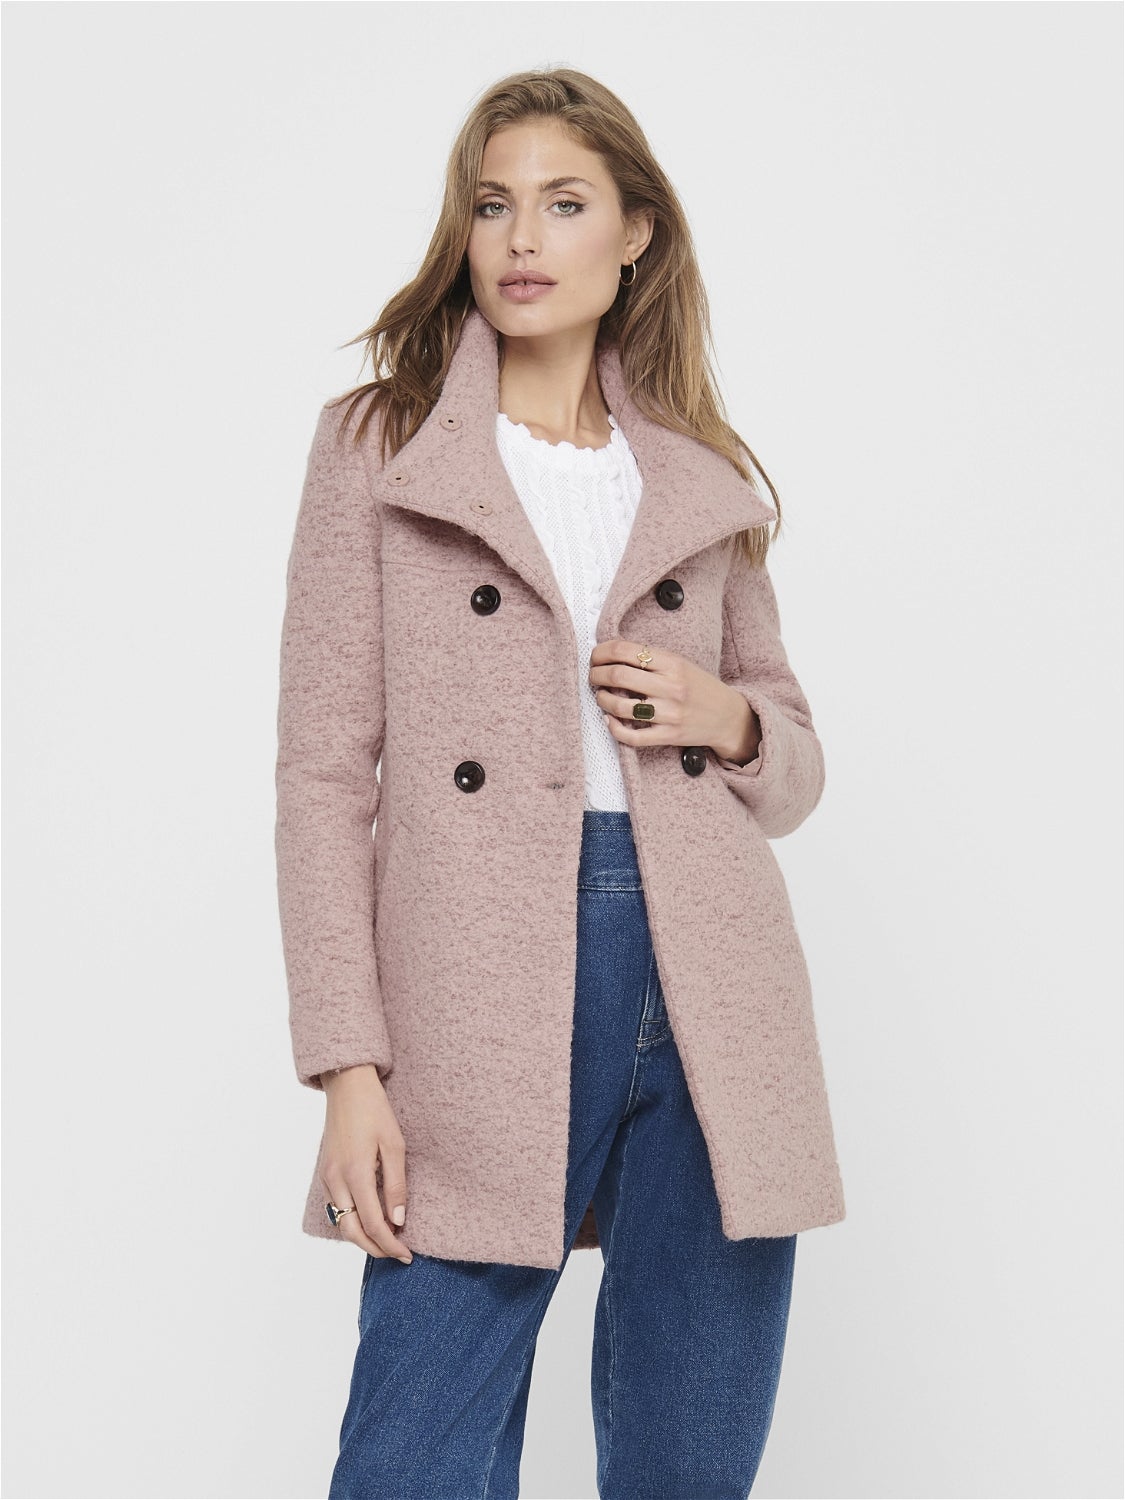 Y.two Long coat discount 50% WOMEN FASHION Coats Knitted Multicolored Single 